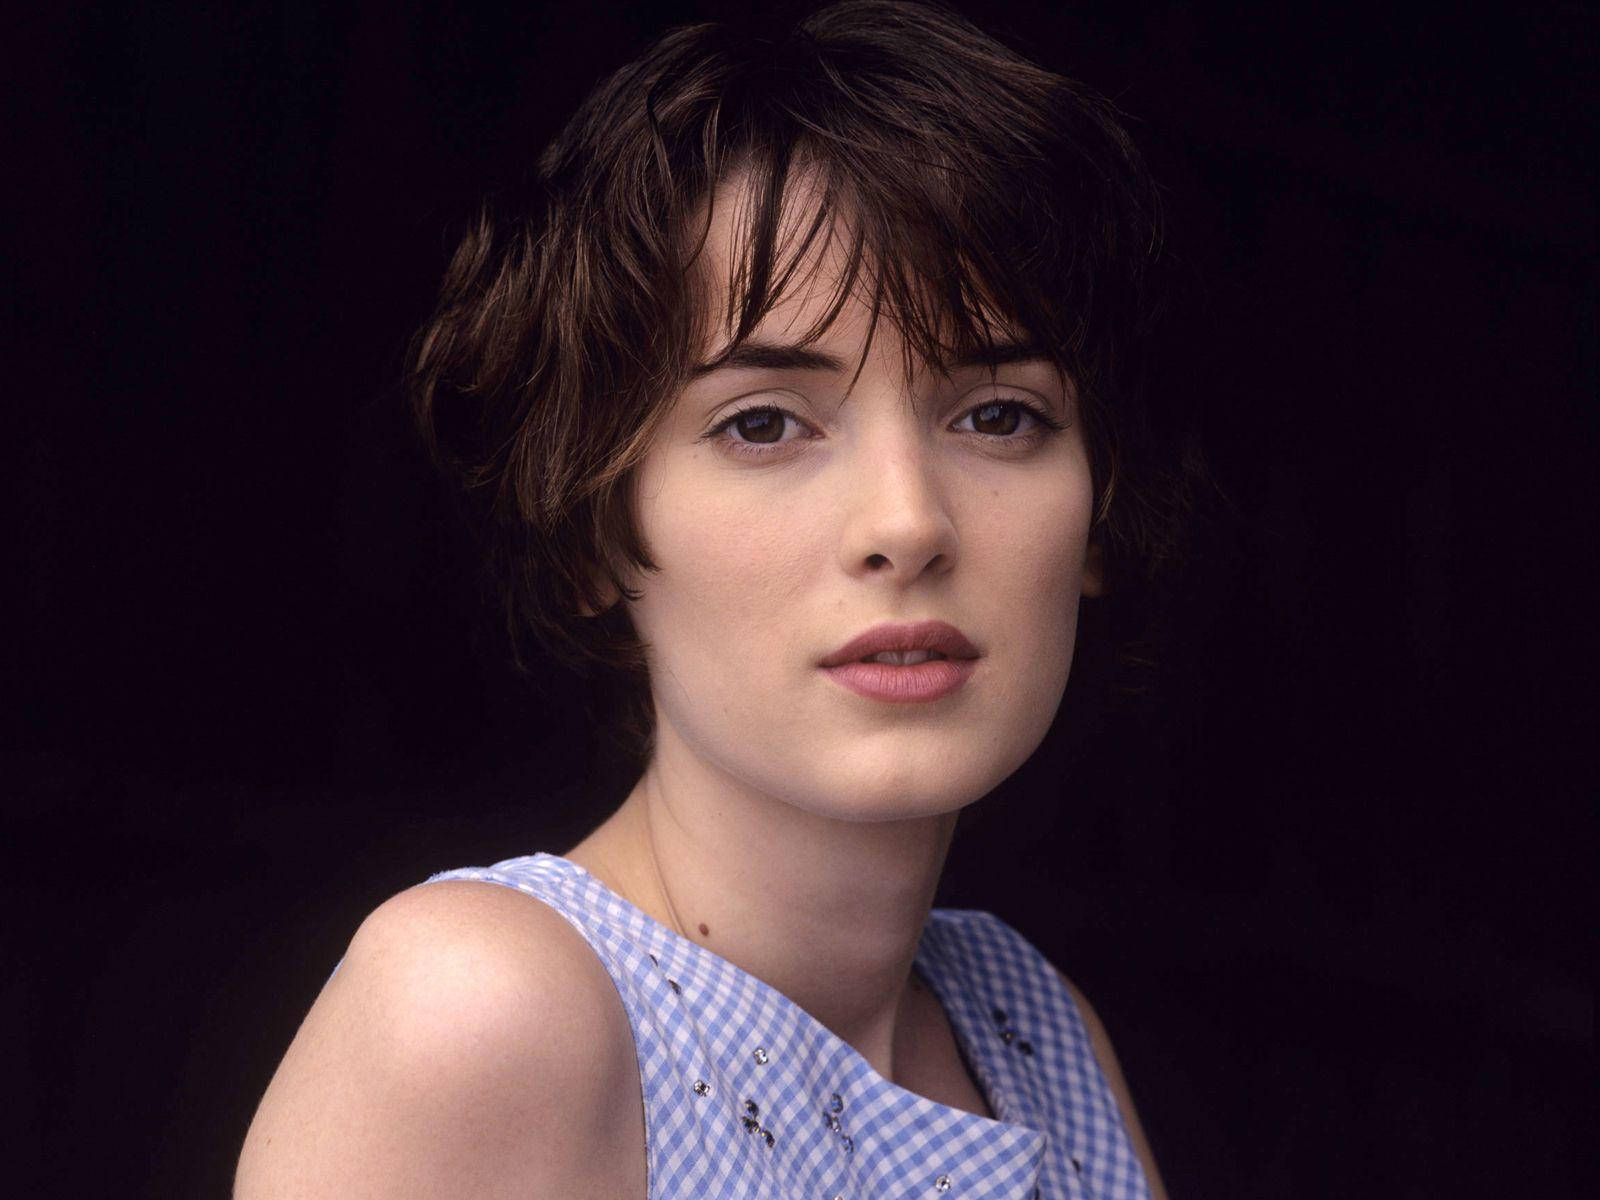 Winona Ryder Sultry Stare Wallpaper